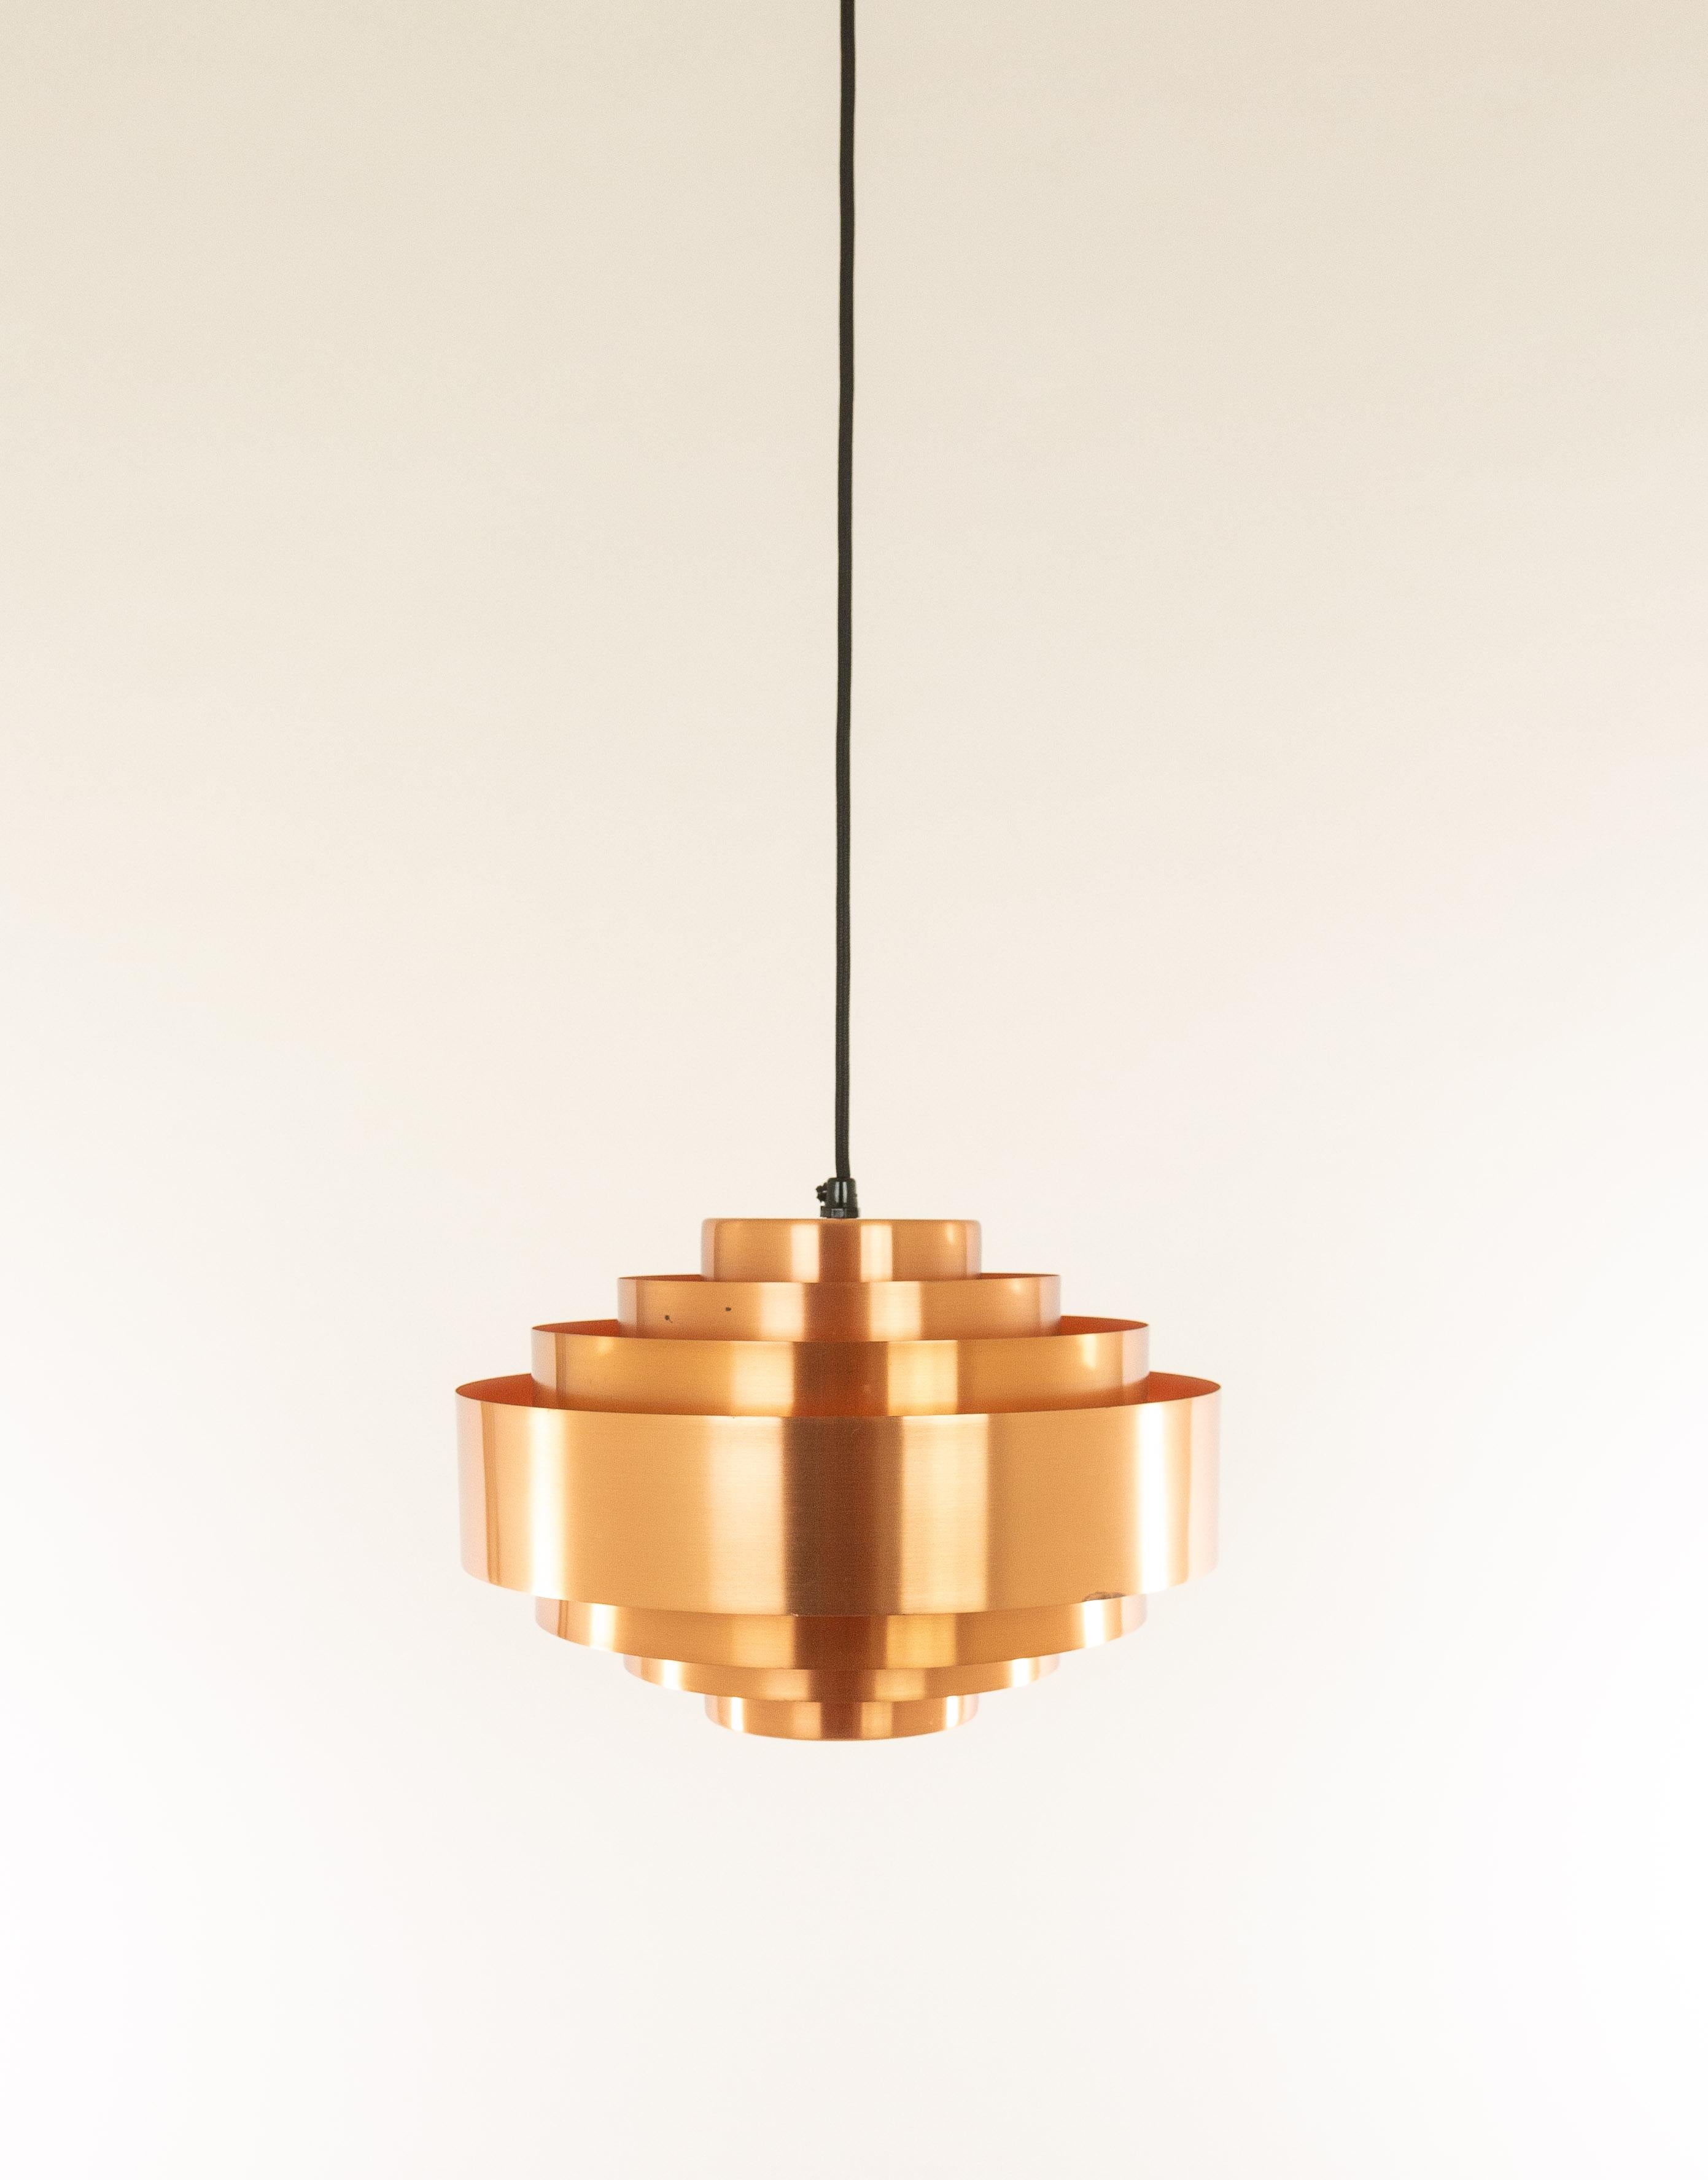 This 'Ultra' pendant was designed by Jo Hammerborg for Fog & Mørup in the very early 1960s.

The lamp consists of seven rings. Ultra was produced in solid copper and lacquered aluminum. This is the copper version with an orange inner.

The lamp